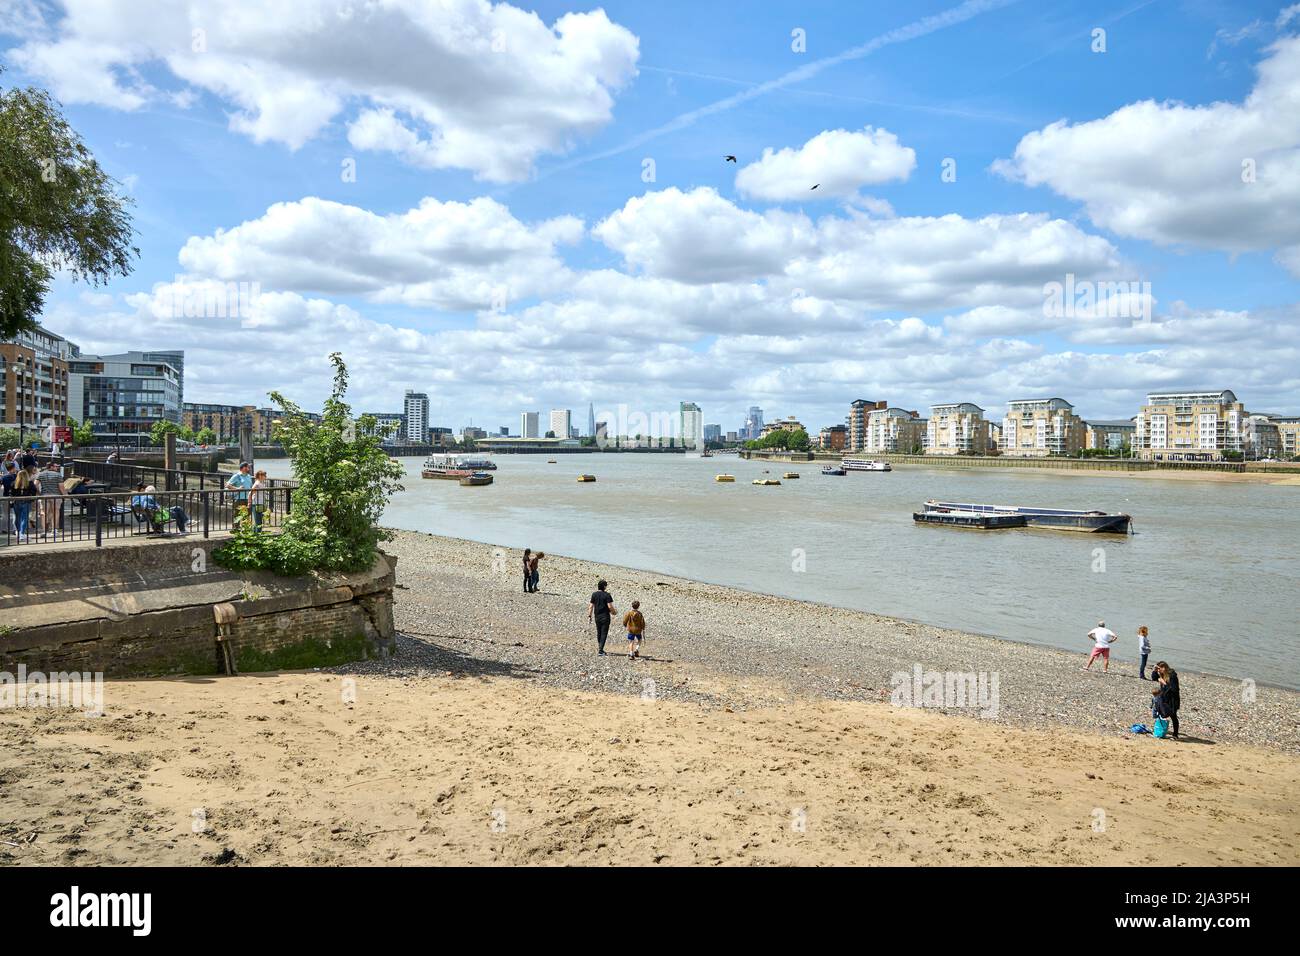 Isle of Dogs, London viewed from across the Thames at Greenwich at low tide, showing the beach. Stock Photo